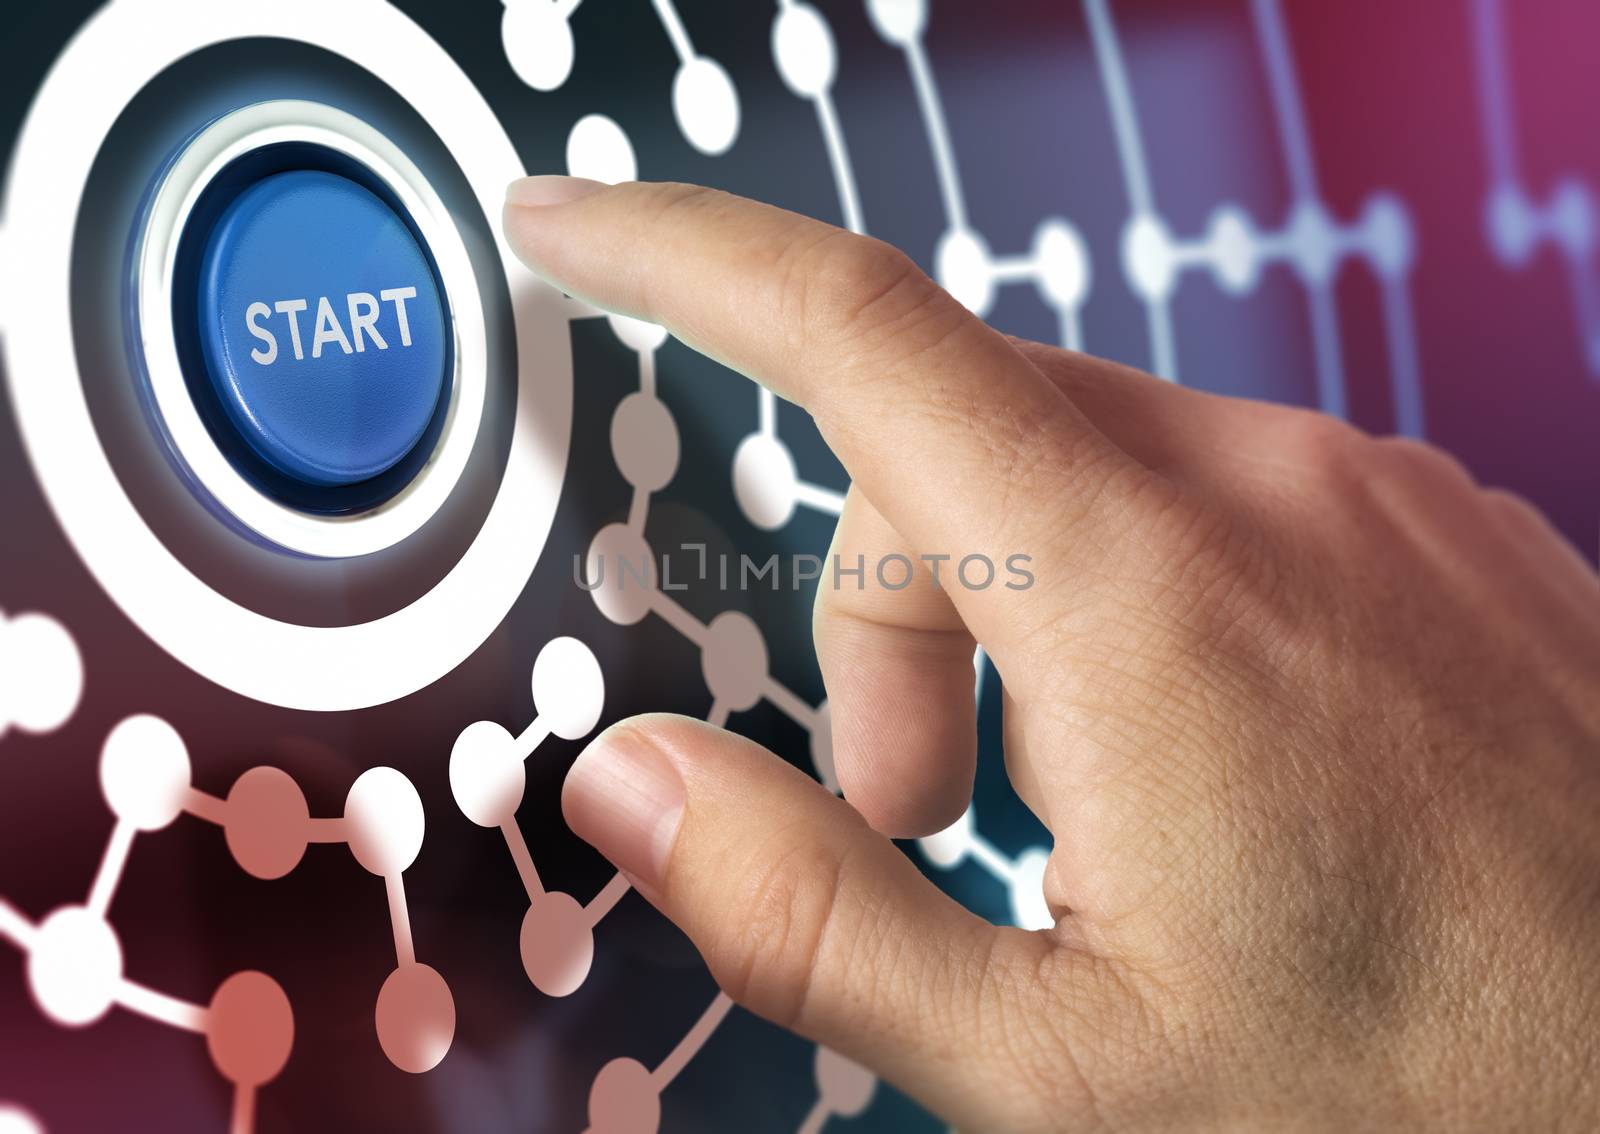 One finger pressing a start button, image concept of global internet business or social network.